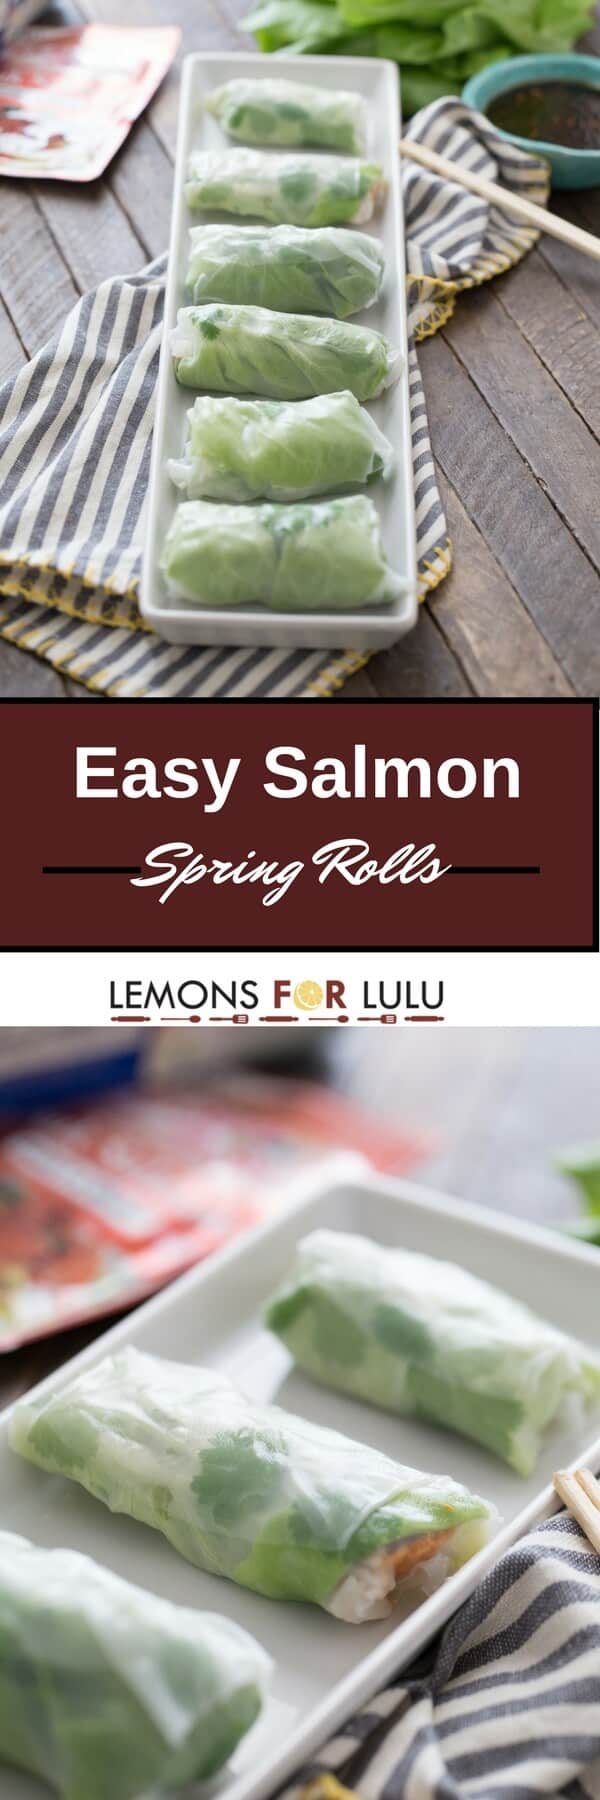 Spring rolls are so light and tasty. These salmon filled rolls are a snap to prepare. You'll find yourself making these spring rolls all the time!